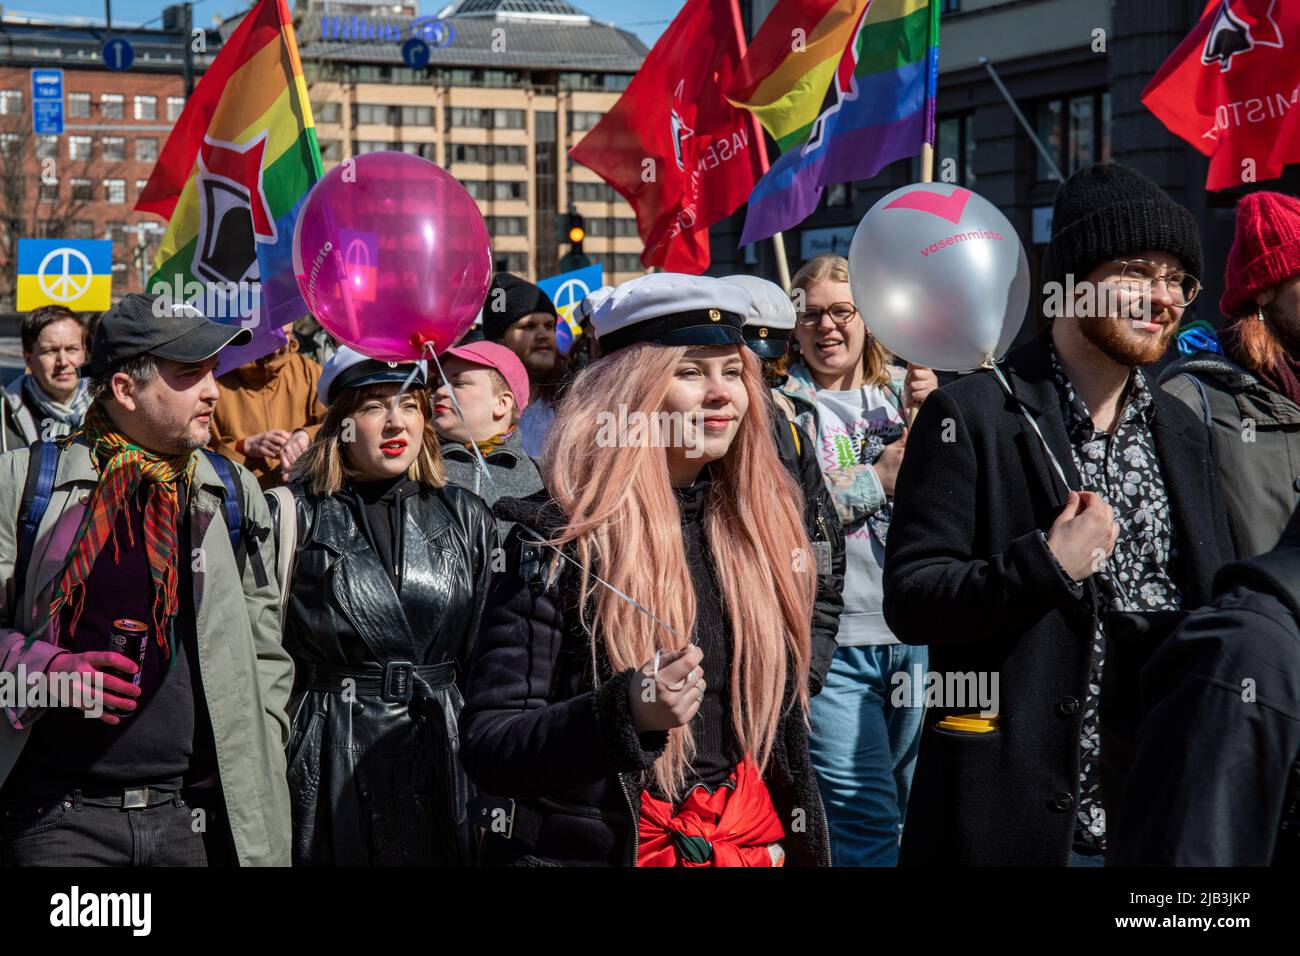 Young people with balloons and flags at socialist May Day parade on International Workers' Day in Helsinki, Finland Stock Photo